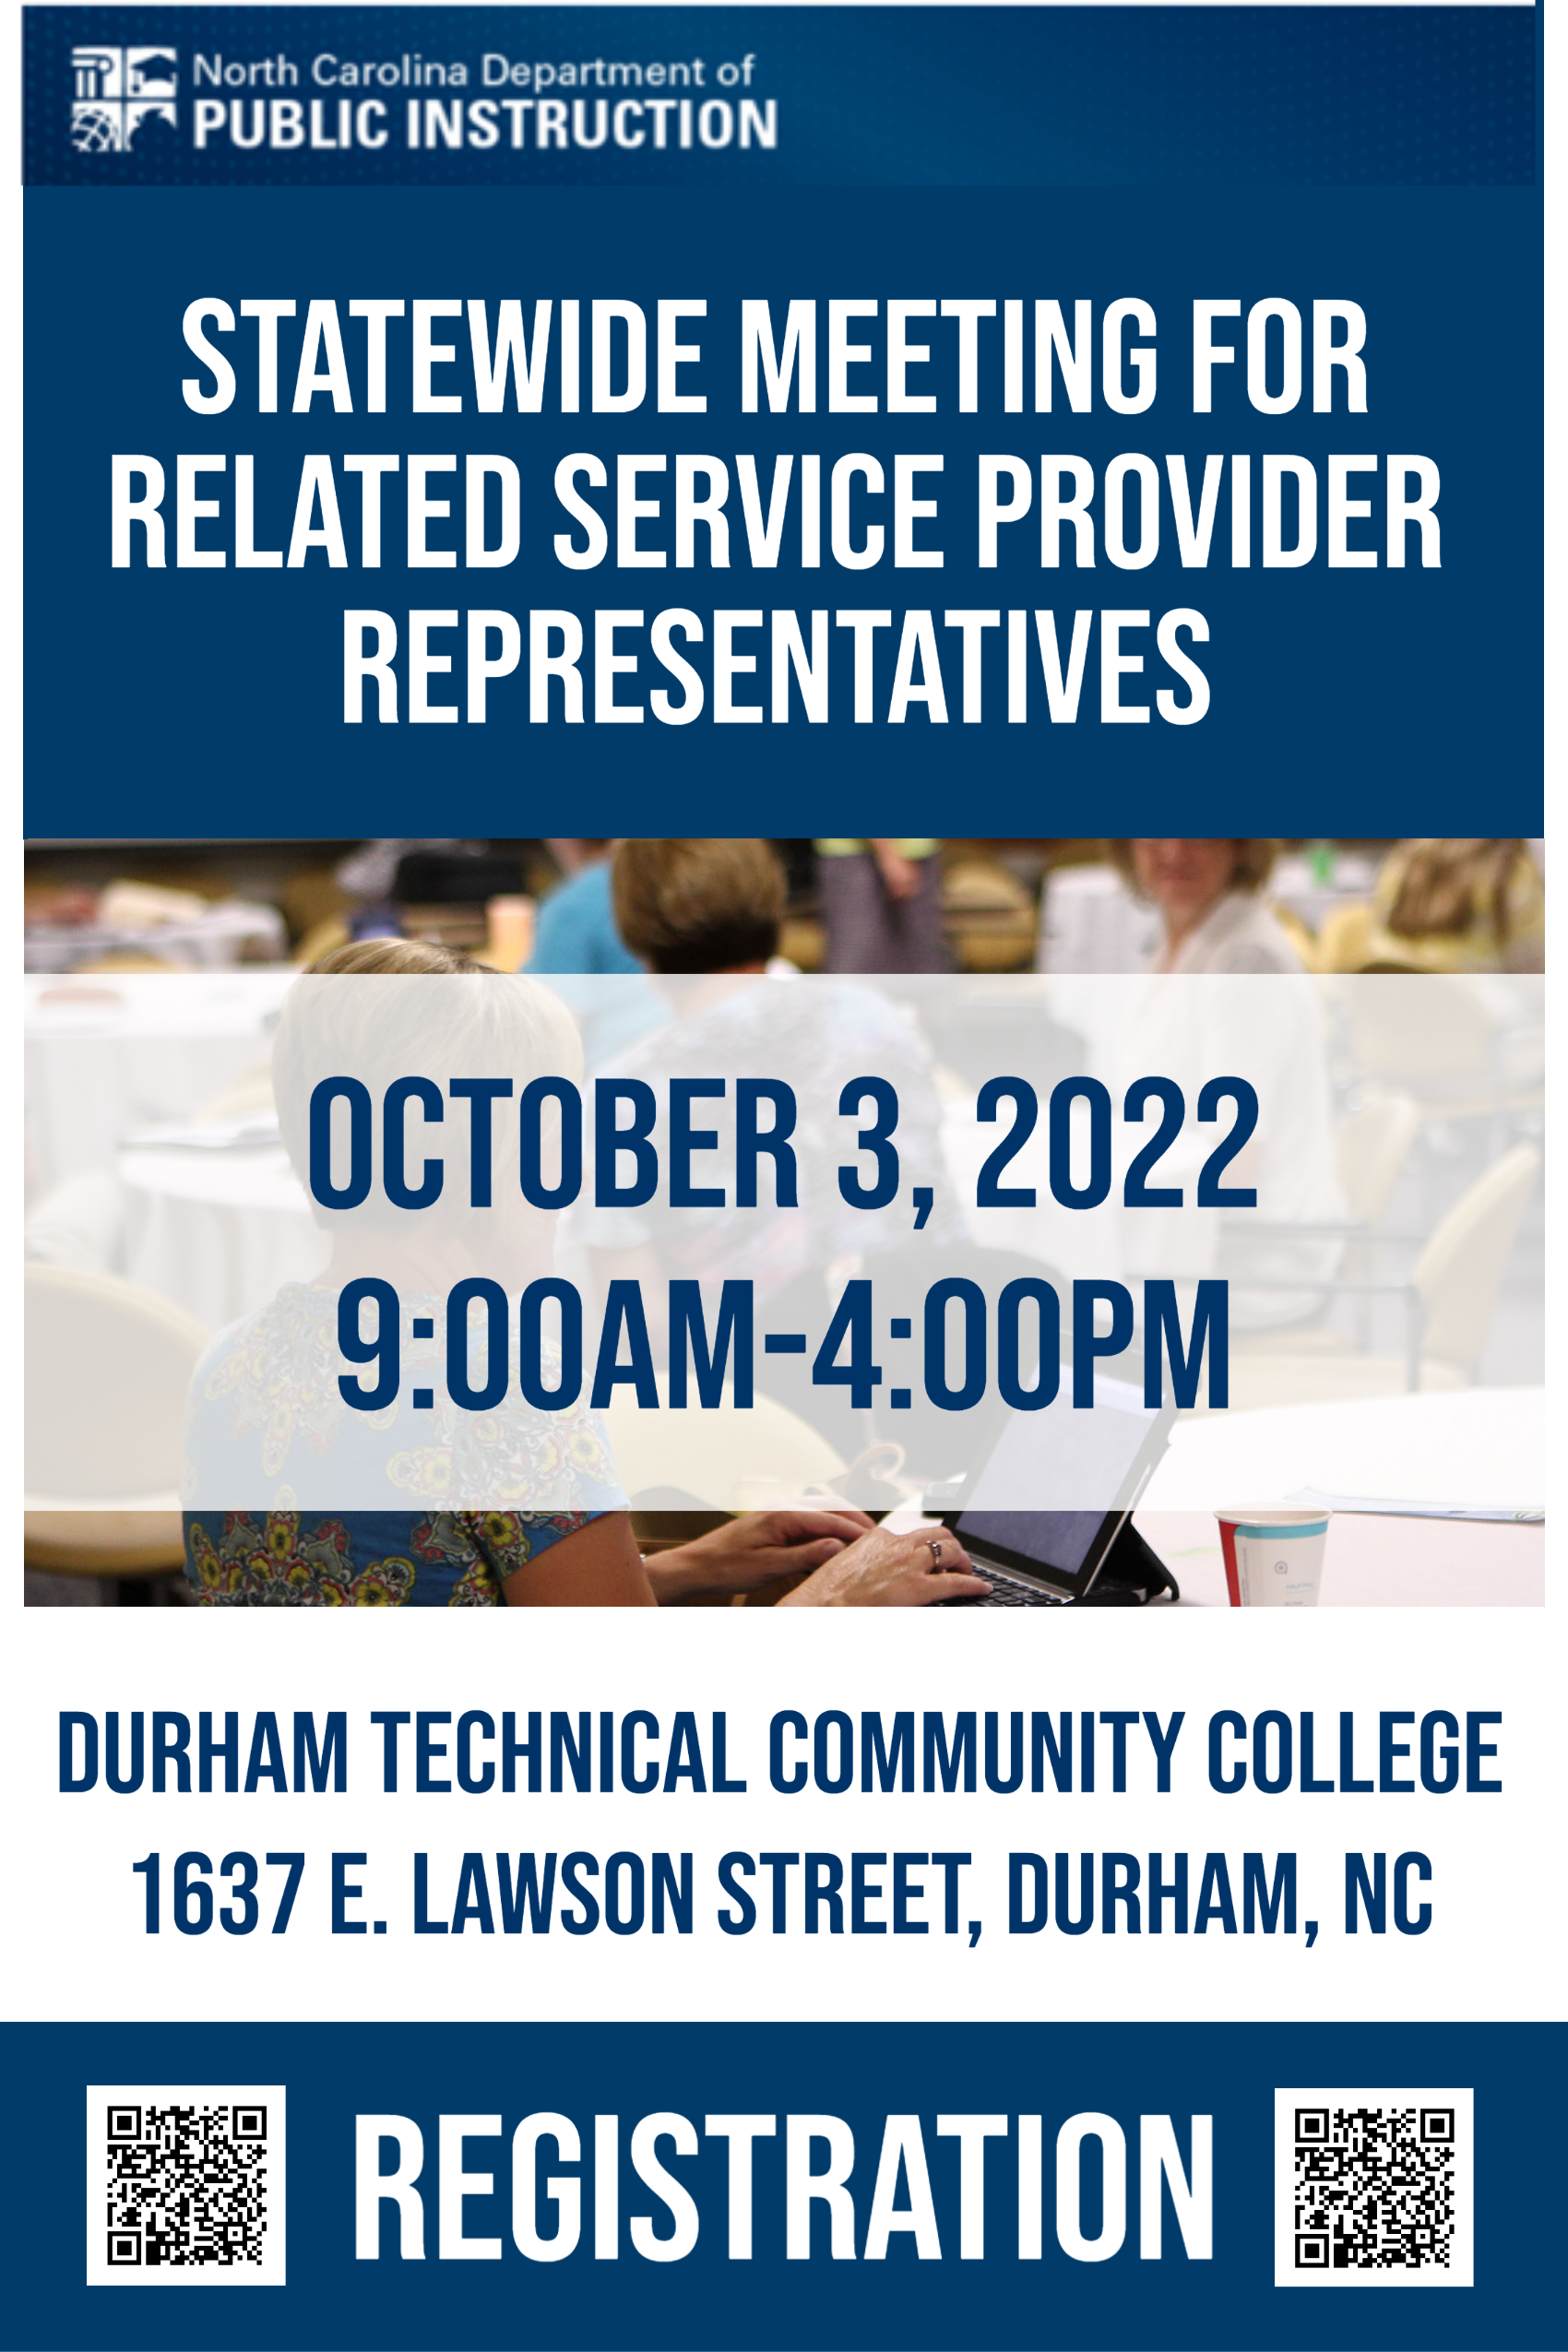 Statewide Meeting for Related Service Provider Representatives, October 3, 2022 9:00am - 4:00pm; Durham Technical Community College